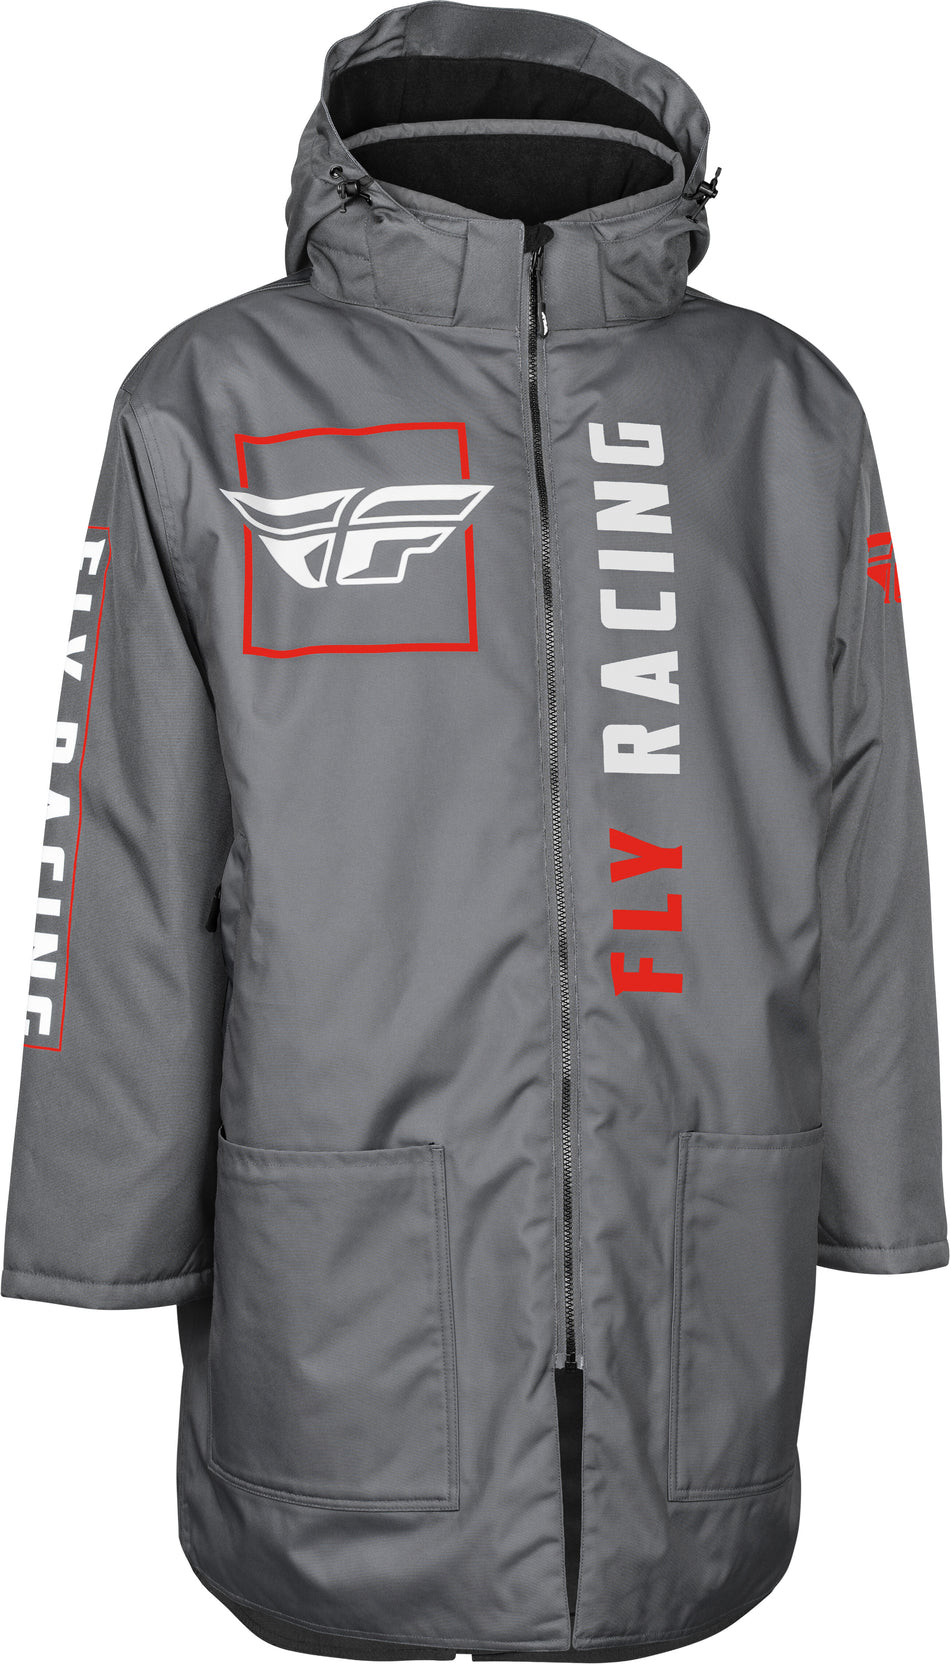 FLY RACING Pit Coat Grey/Red 470-4052